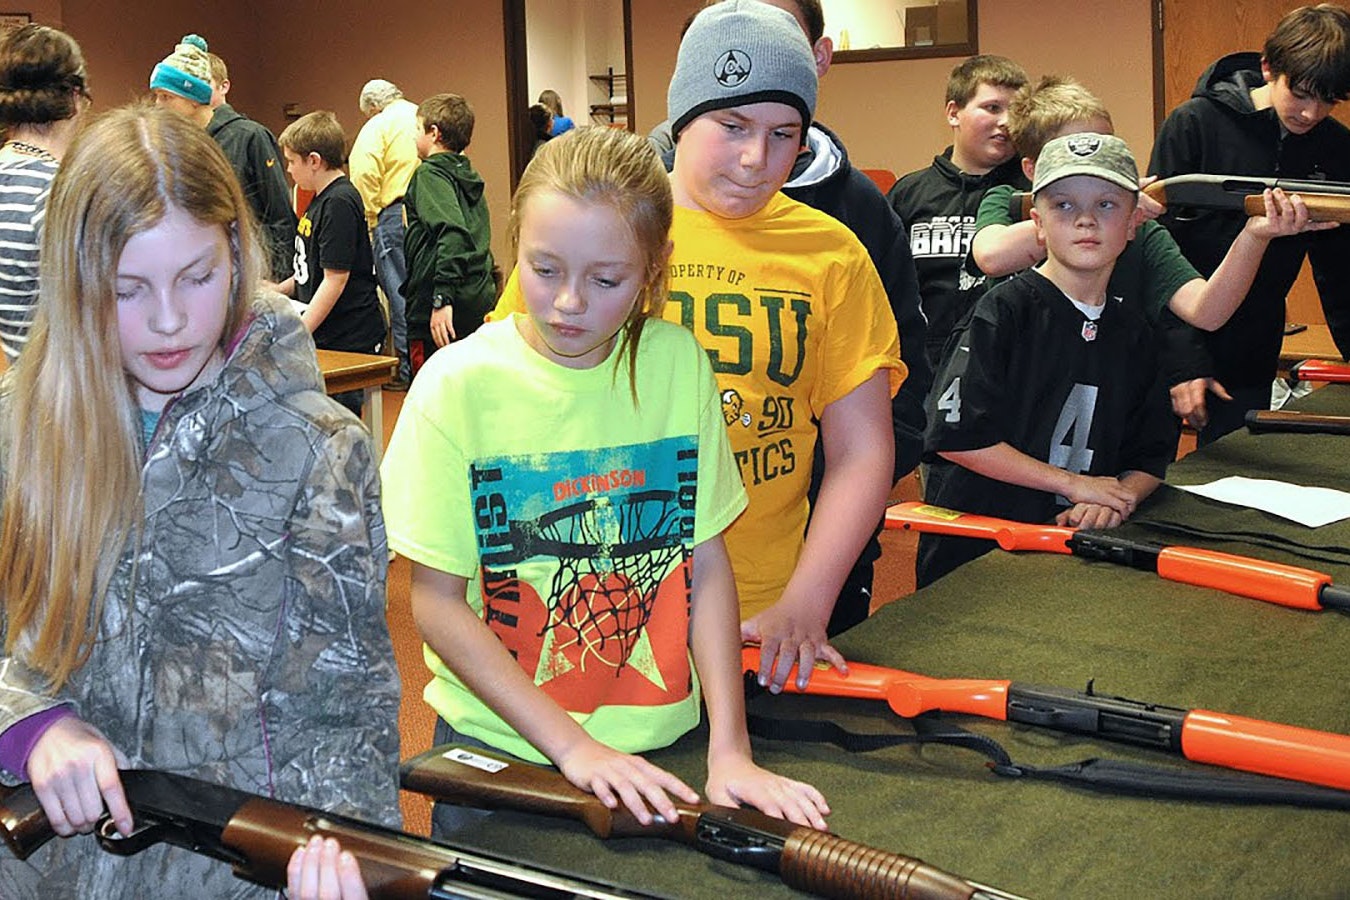 A hunting education class for young students in North Dakota. Wyoming officials said Monday they intend to expand programs here despite Biden administration attempts to kill them at the federal level.